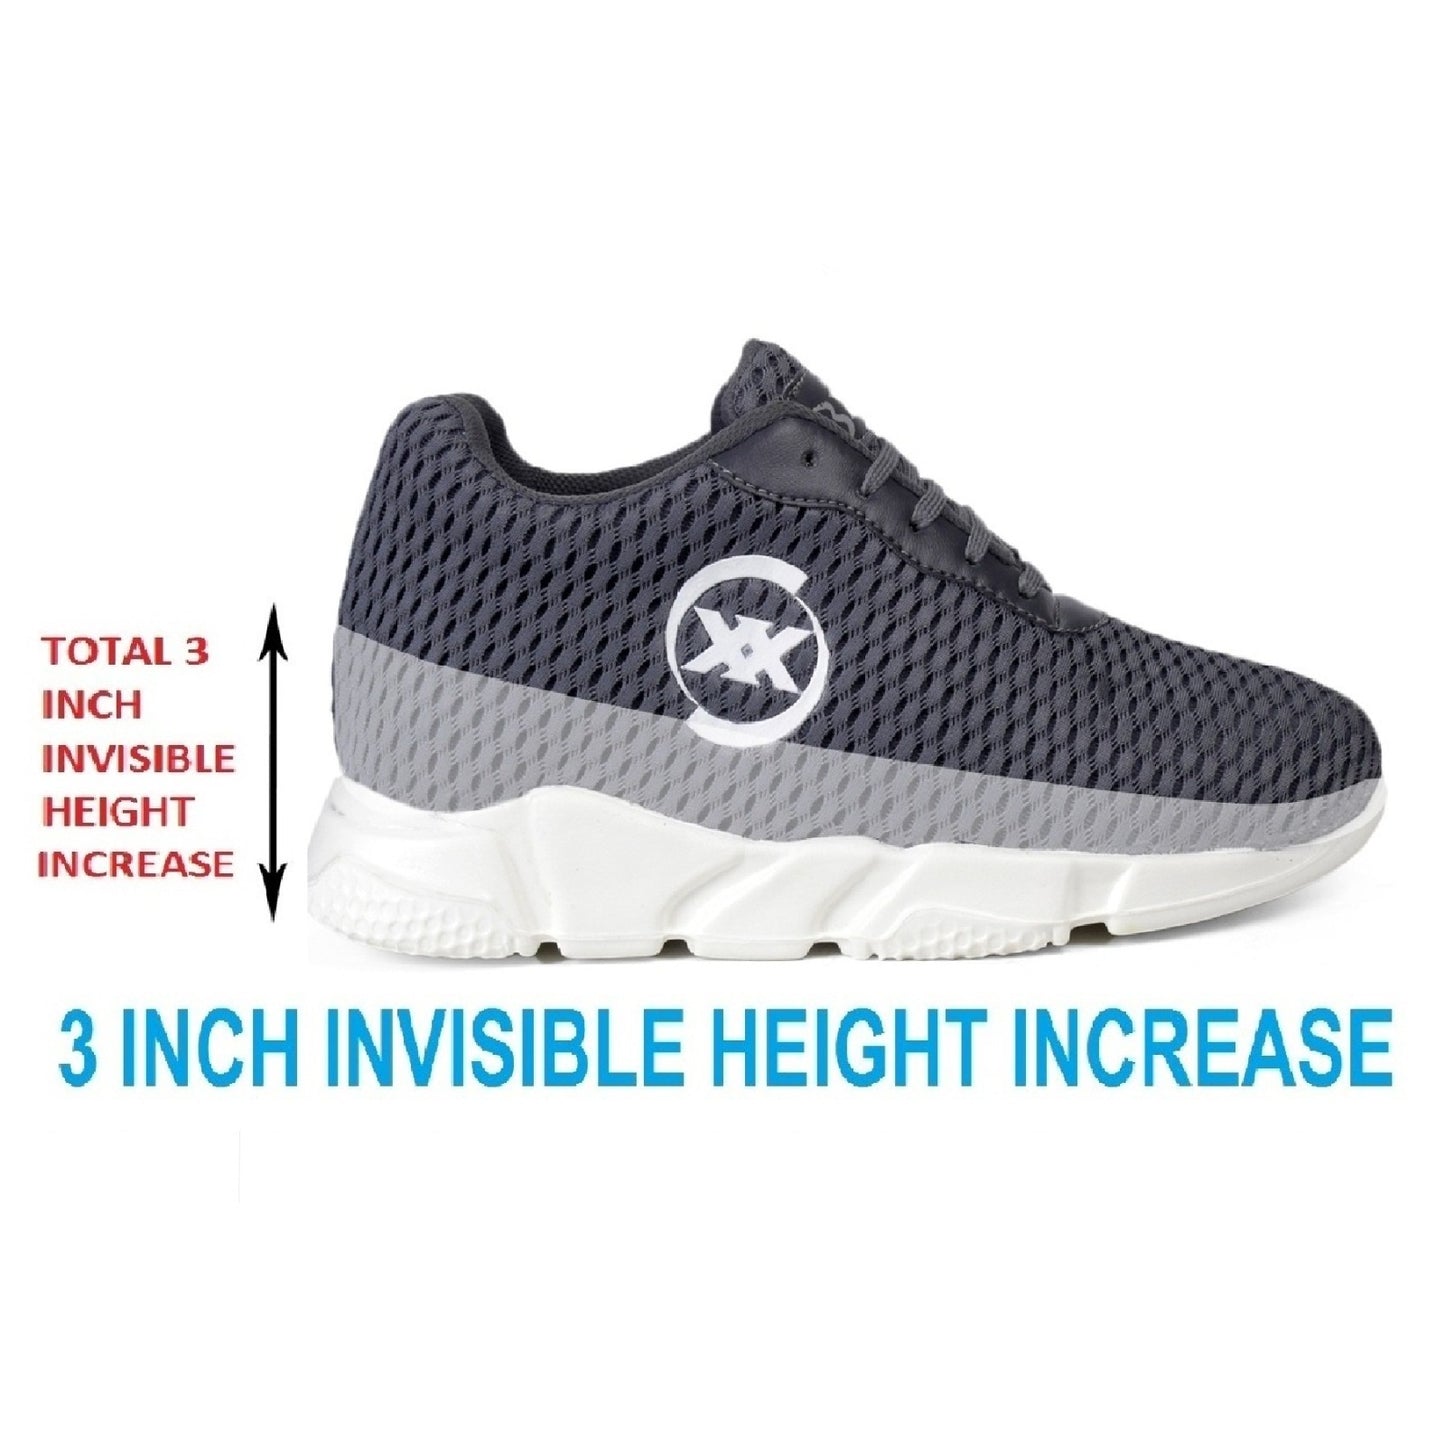 3 Inch Hidden Height Increasing Sport Shoes for Cricket, Football, Basketball etc.